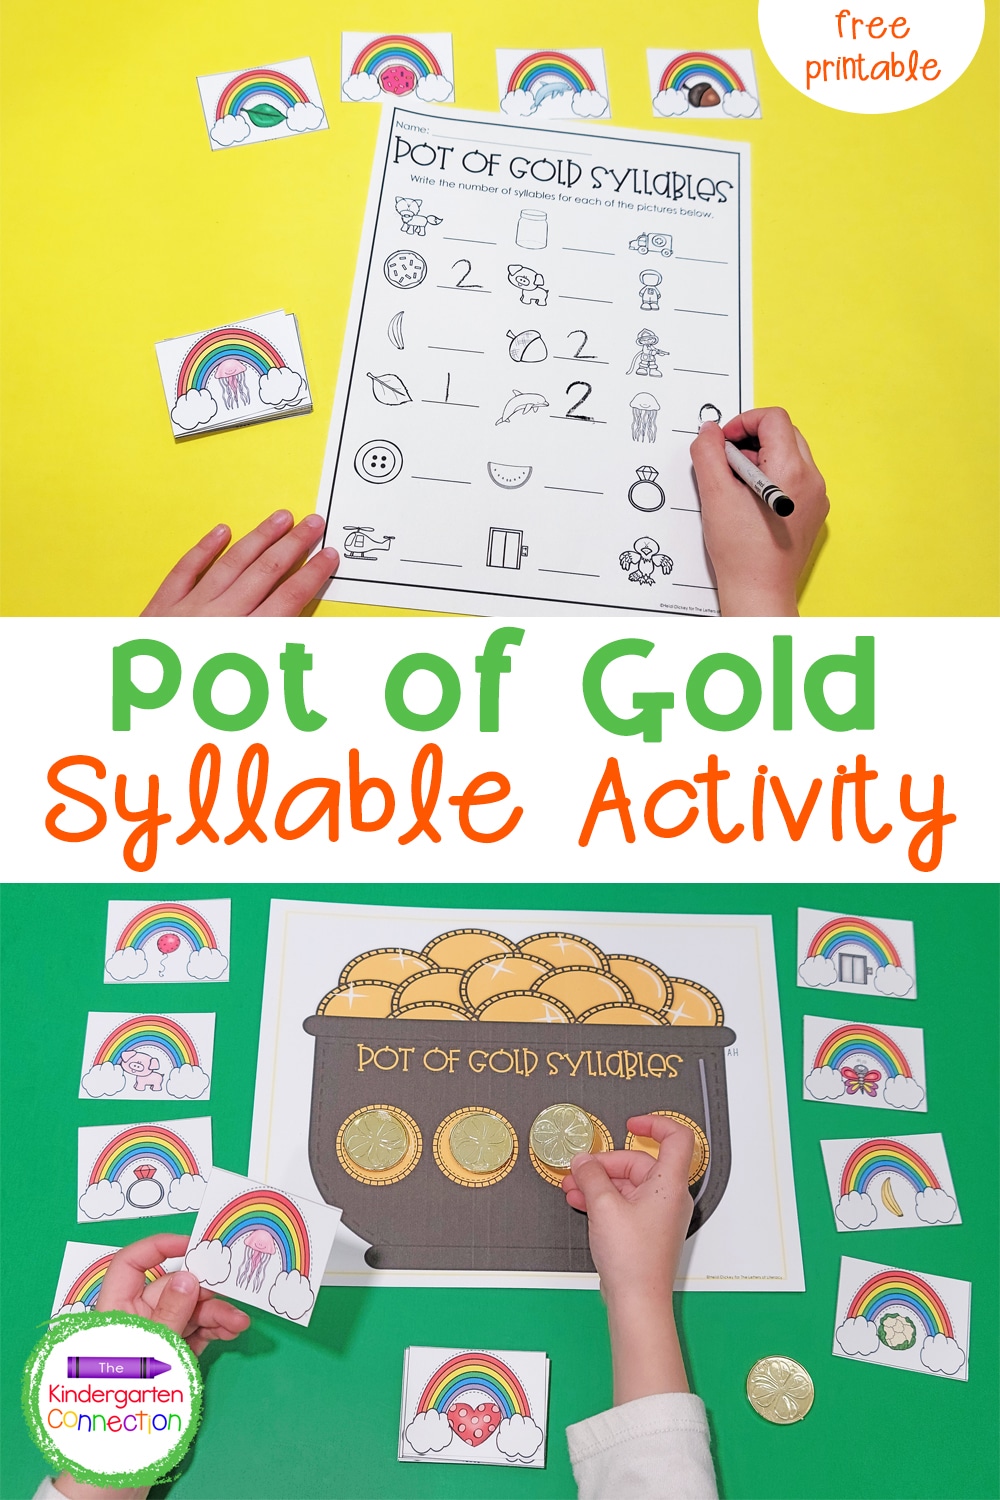 Grab this FREE printable Pot of Gold Syllable Counting Activity to add some hands-on learning fun to your literacy centers this March!